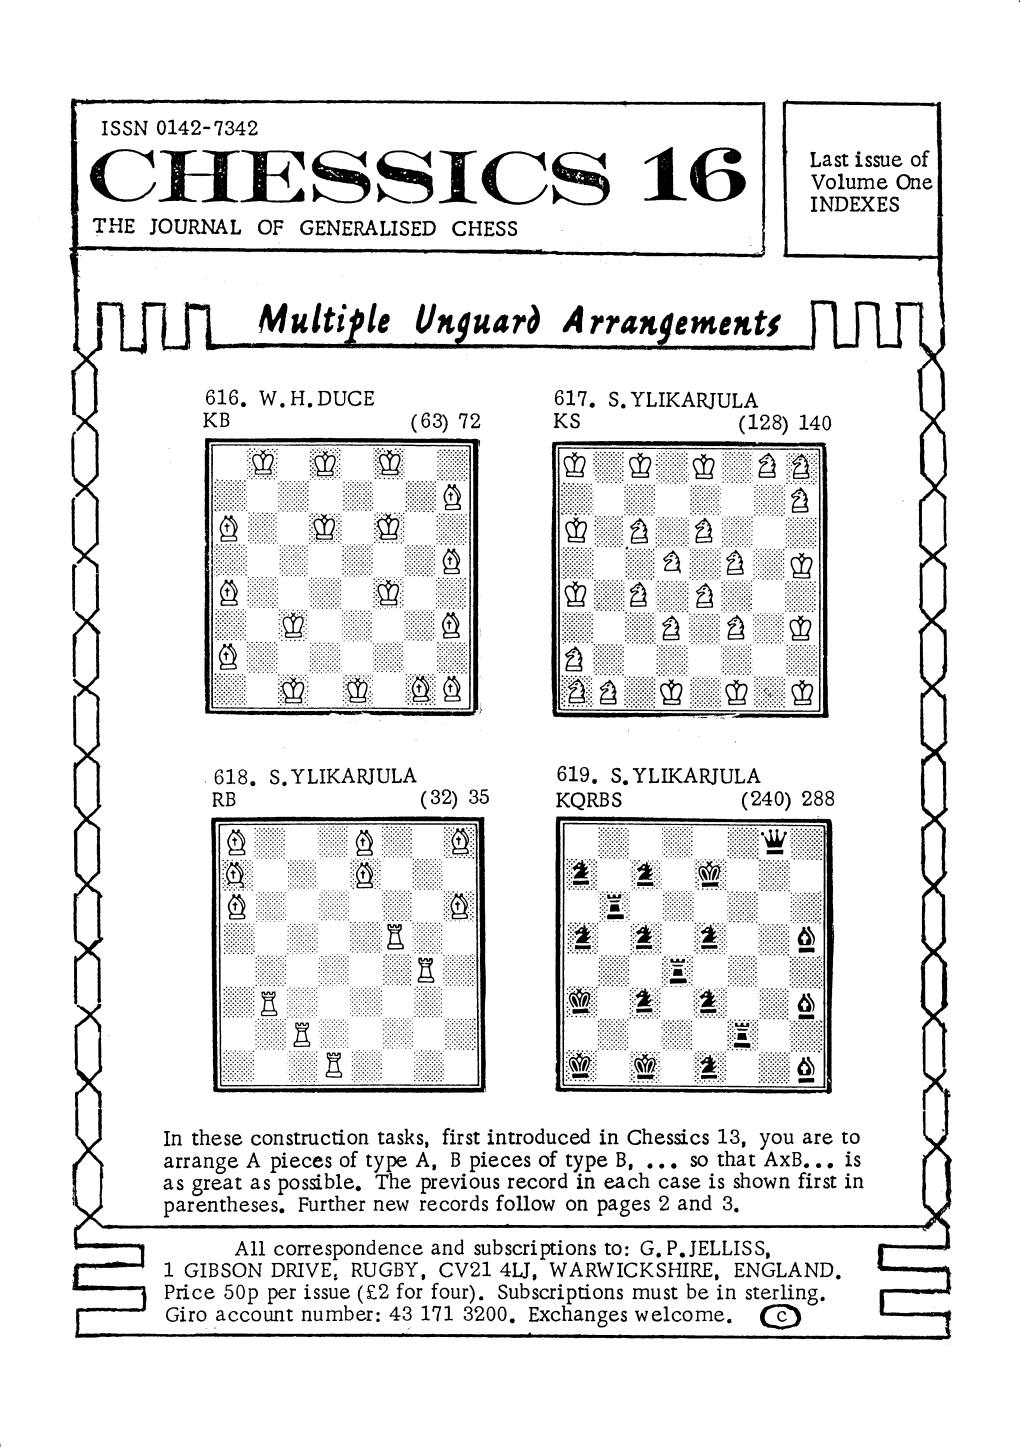 Chessics, Whi.Ch I Hope Tb Publistr As a Supplement Eventually